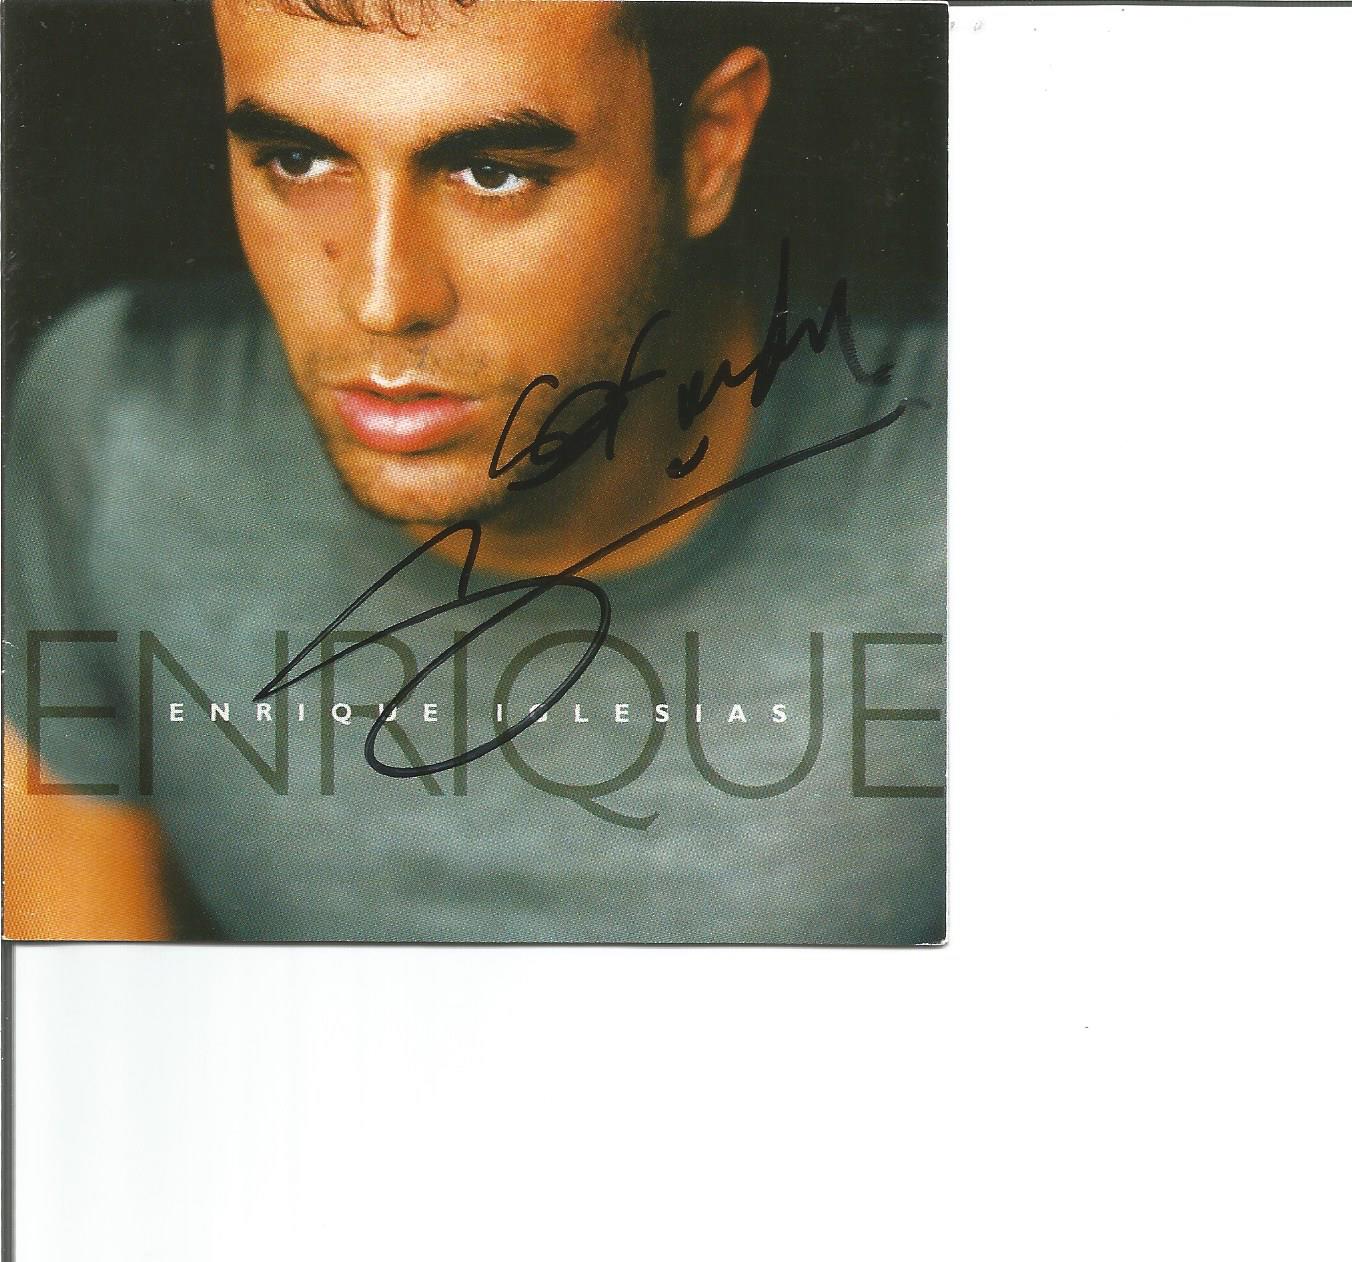 Music Enrique Iglesias signed CD insert. CD included. Good Condition. All signed pieces come with